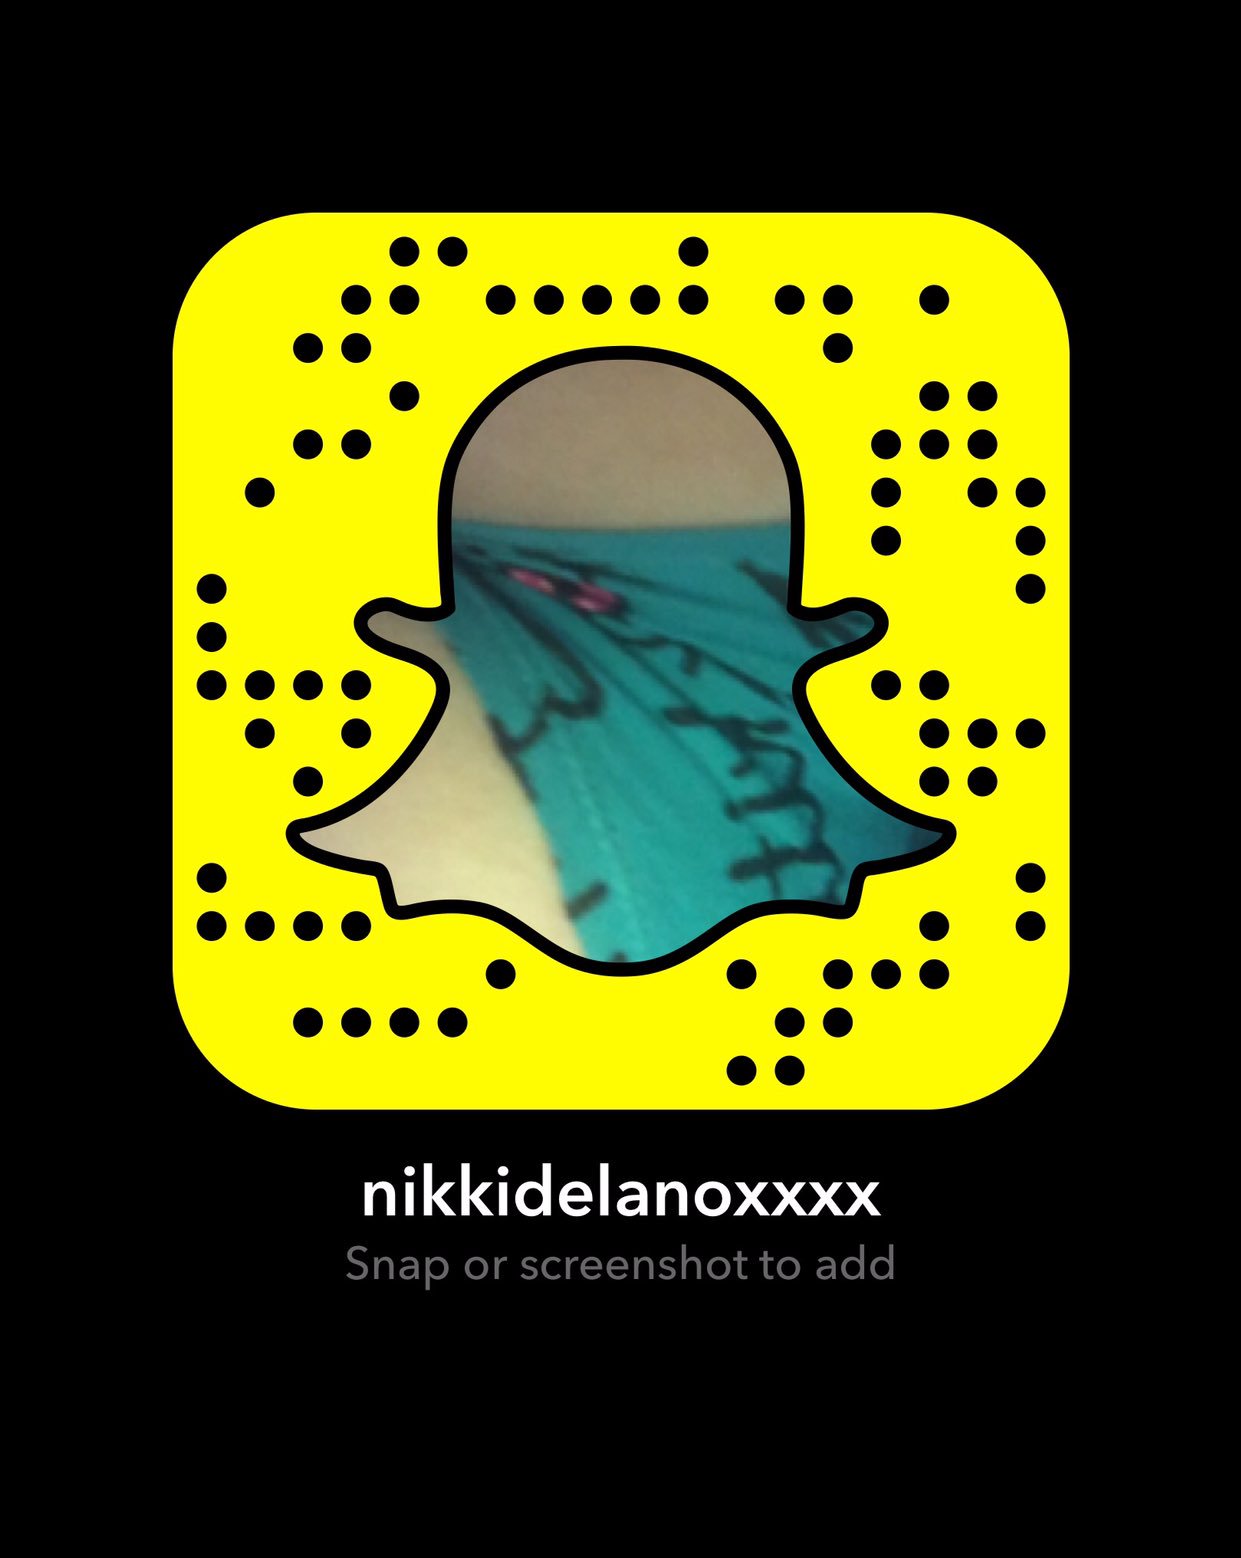 Check out my public Snapchat see my bts from my photoshoot today 🌟Nikkidelanoxxxx with 4xs https://t